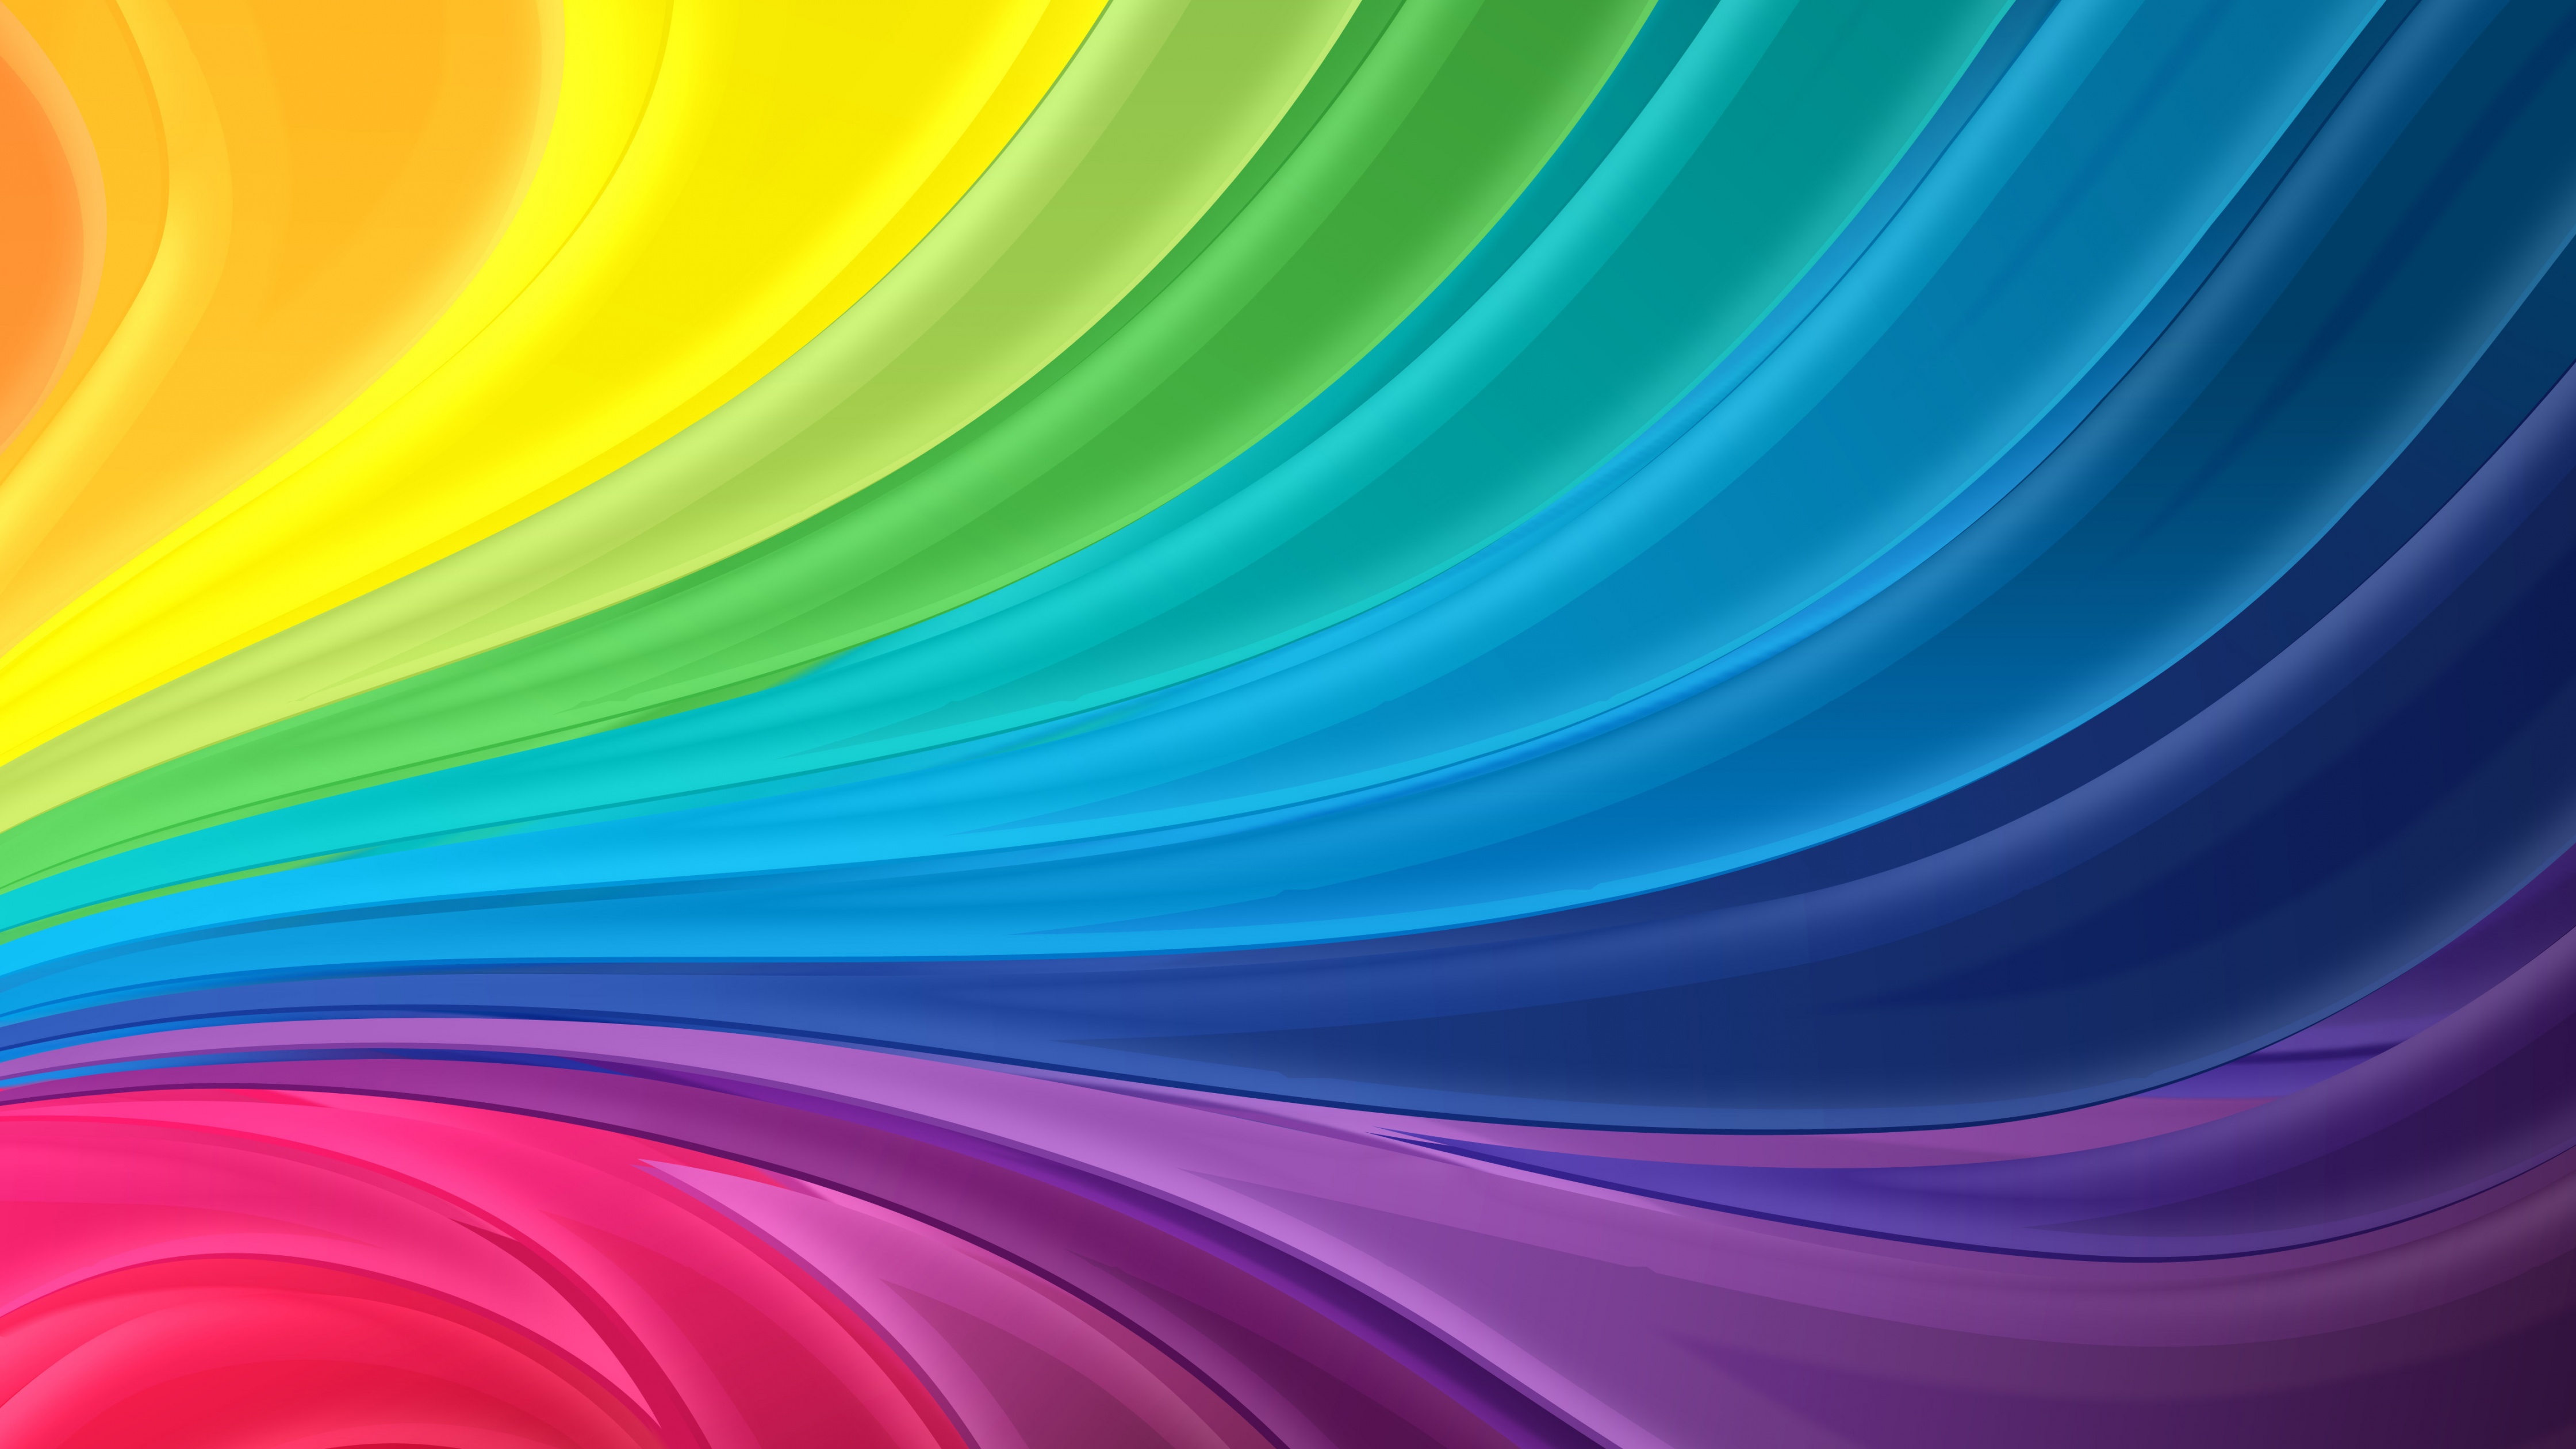 Rainbow colors Wallpaper 4K, Colorful, Multi color, Abstract, #1765